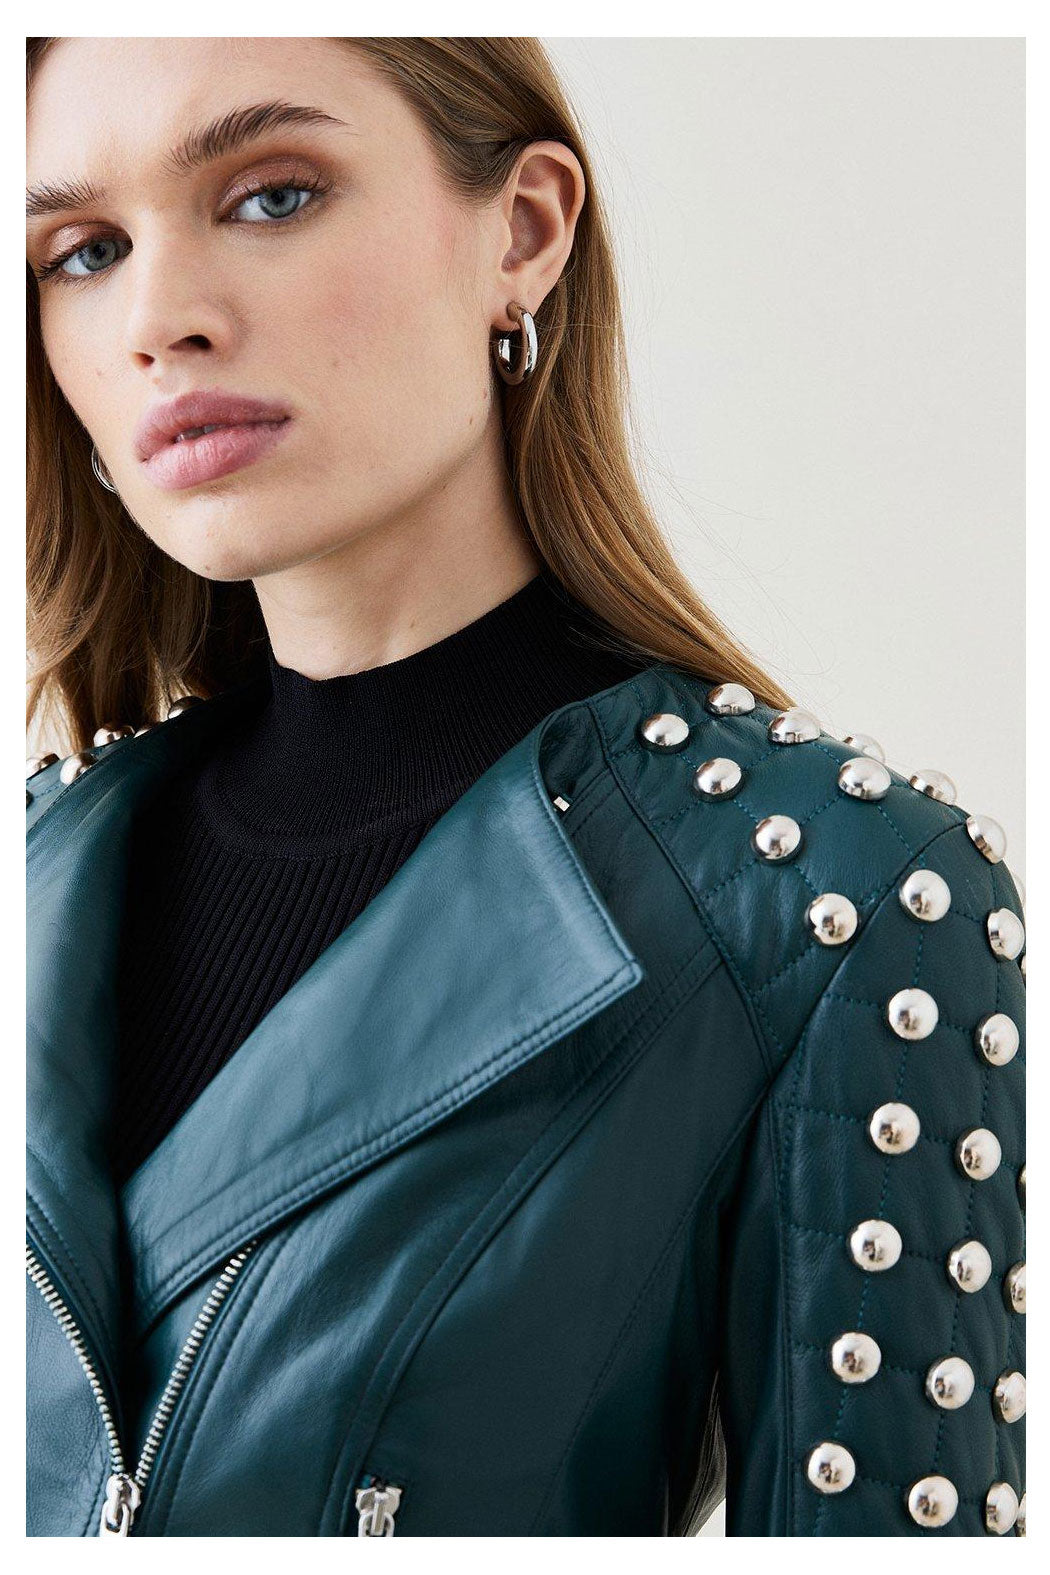 New Women Chocolat Green Spiked Studded Retro Motorcycle Style Silver Leather Biker Jacket